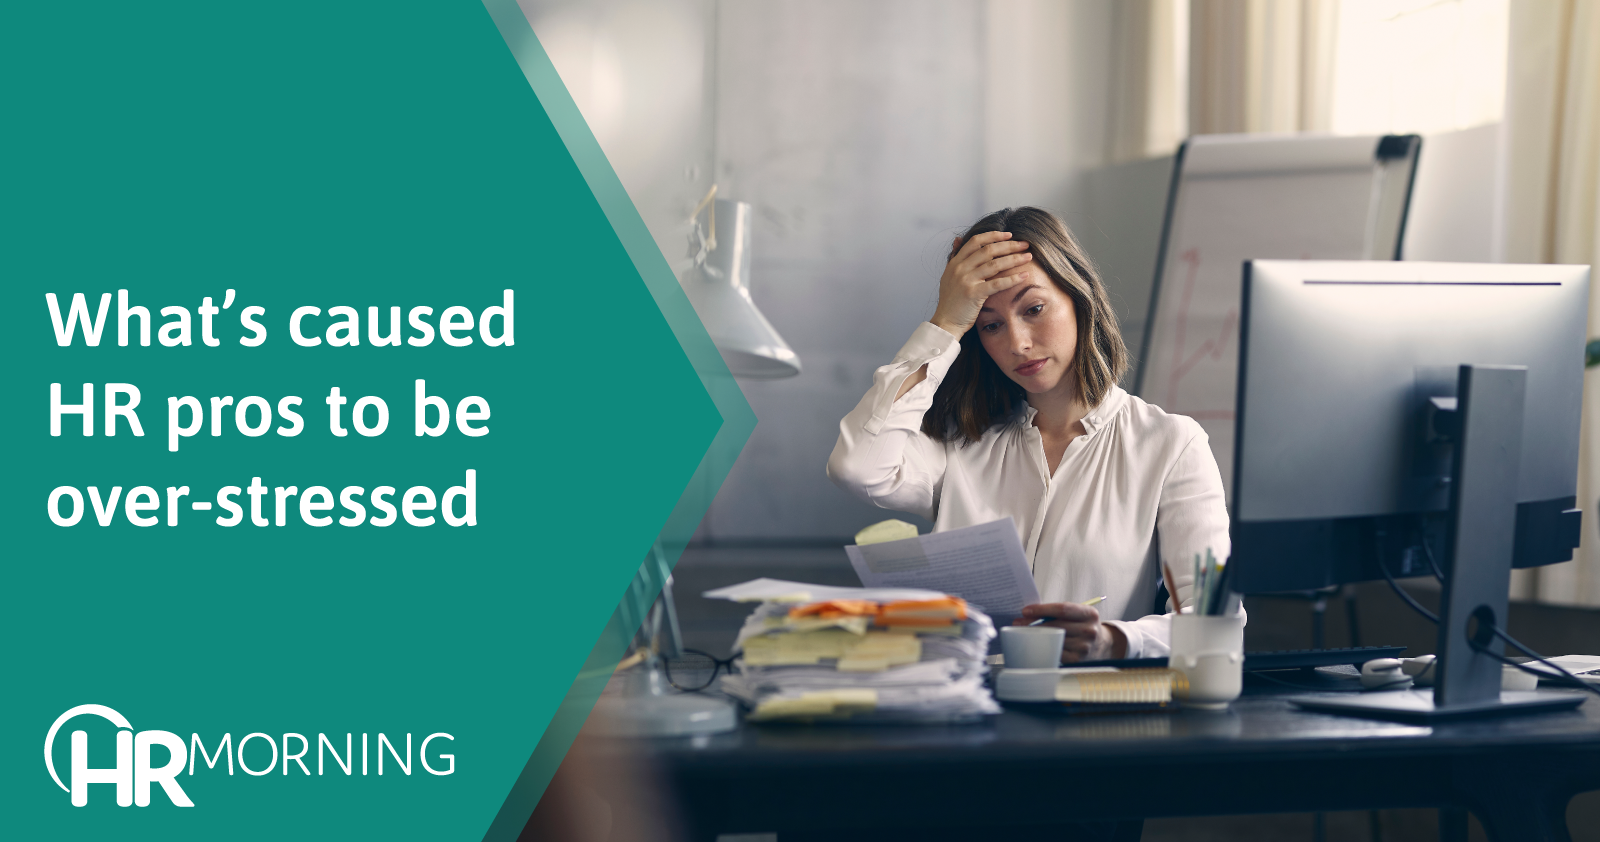 What's caused HR pros to be over-stressed